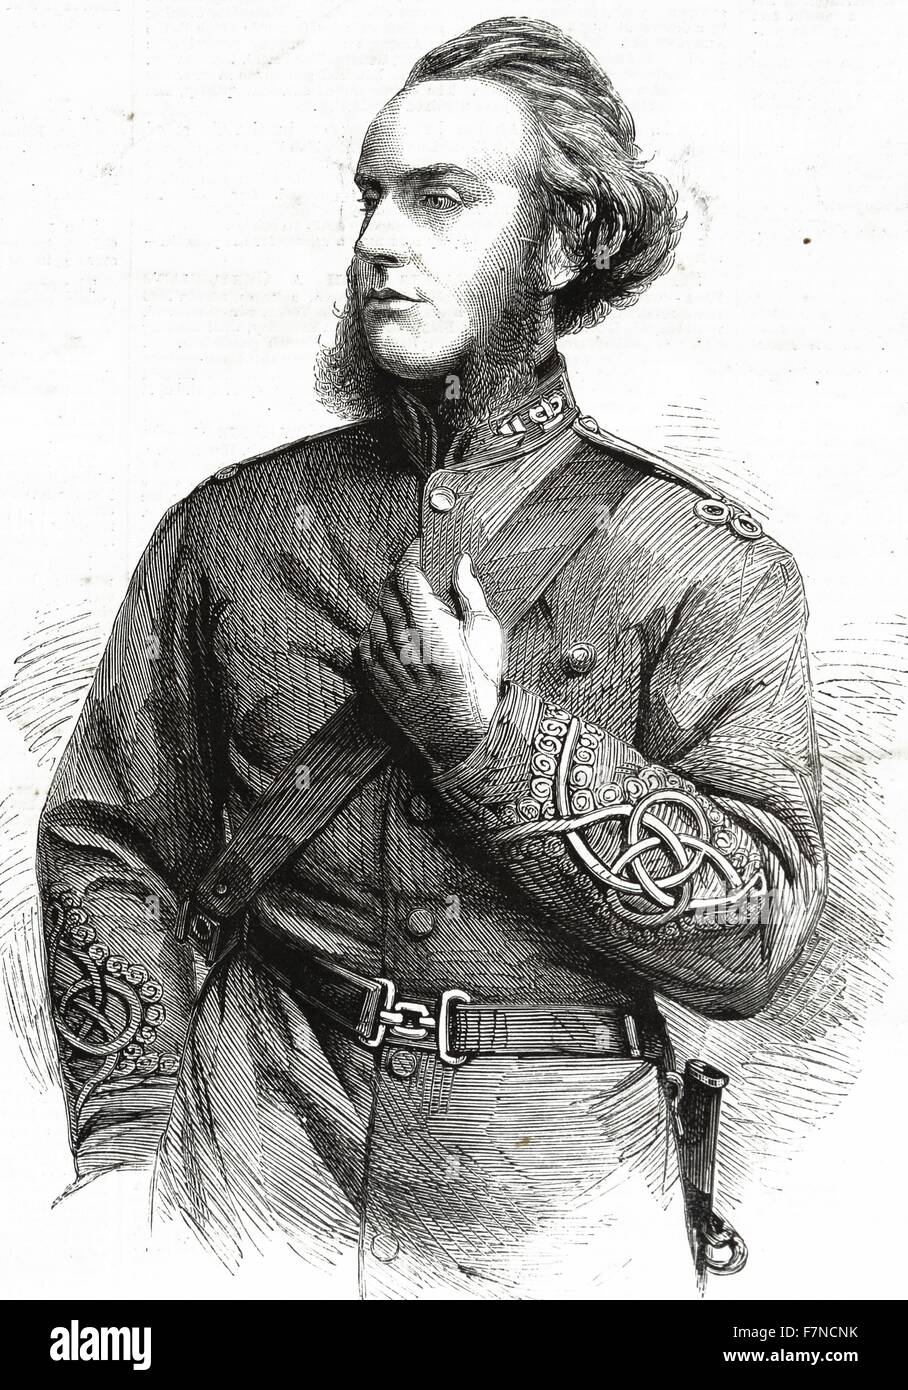 Francis Richard Charteris, 10th Earl of Wemyss GCVO (4 August 1818 – 30 June 1914), styled as Lord Elcho between 1853 and 1883, was a British Whig politician. He founded the Liberty and Property Defence League., from a photograph by John Watkins. Stock Photo